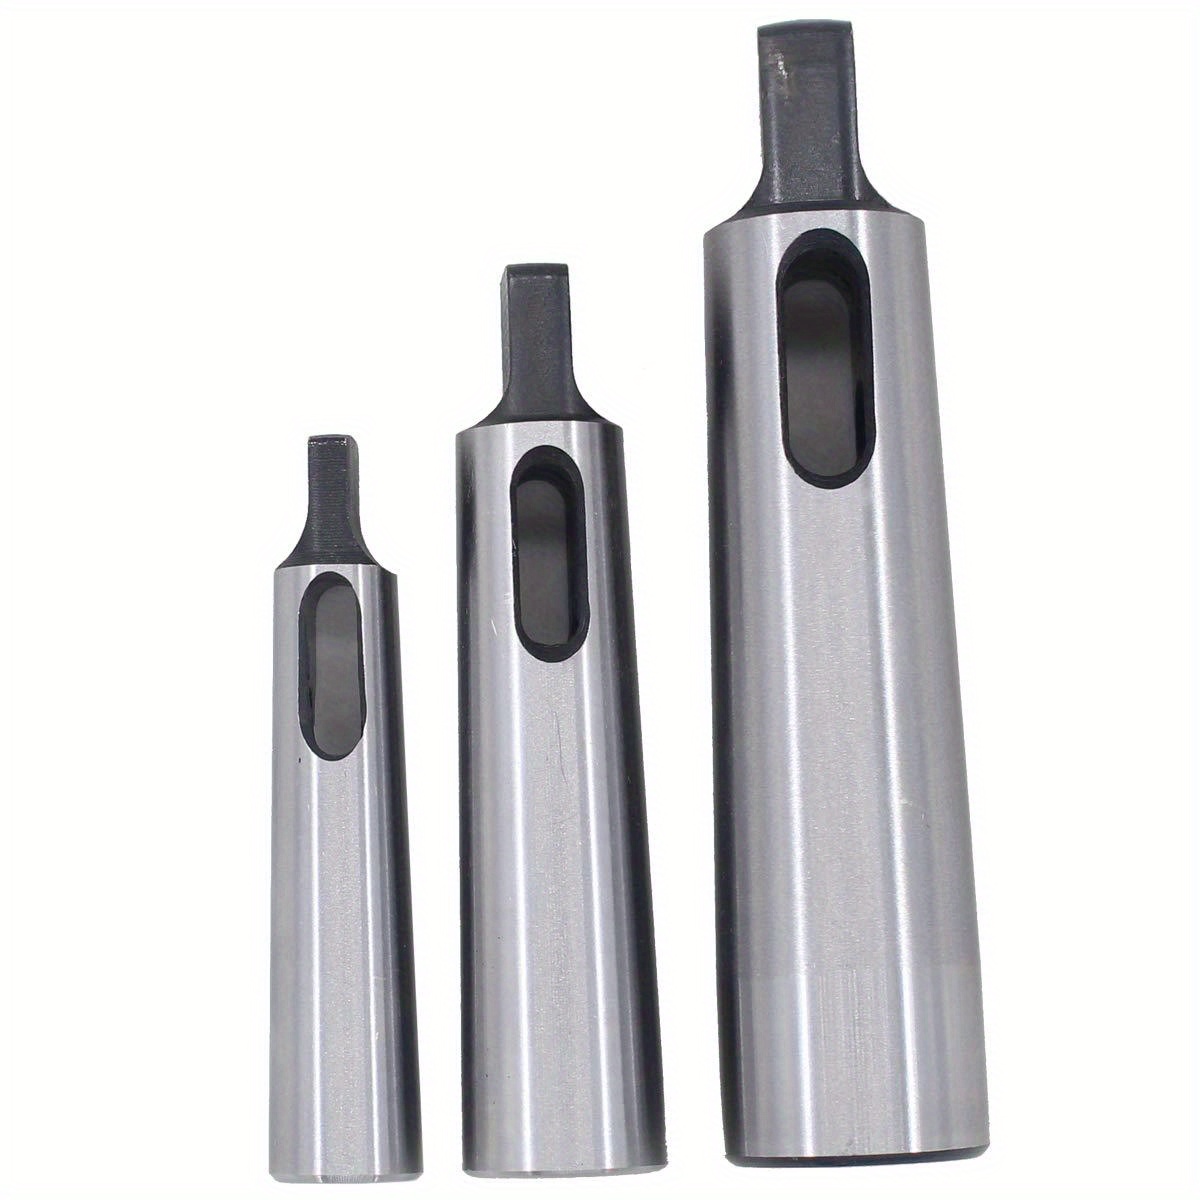 

3pcs Mt1 To Mt2, Mt2 To Mt3, Mt3 To Mt4 Taper Drill Sleeve Reducing Adapter For Lathe Milling